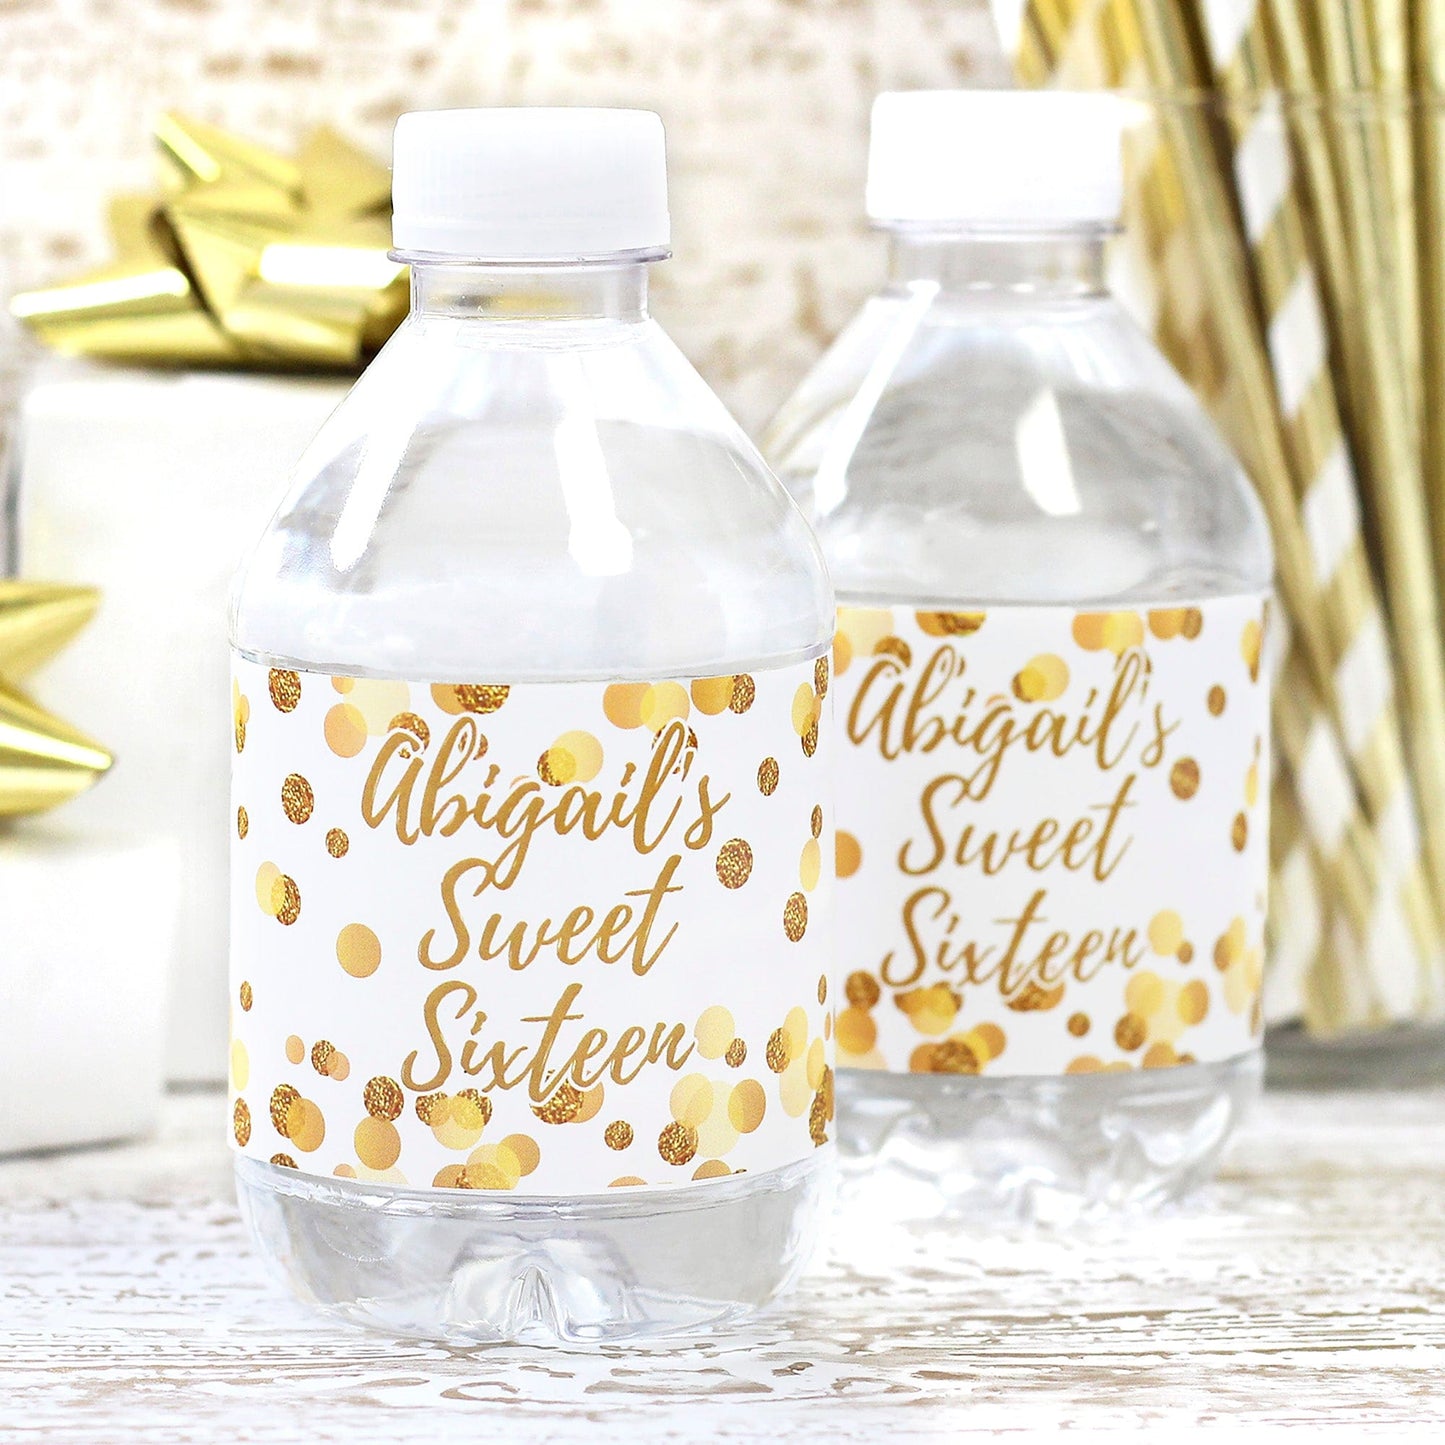 Give a special touch to your sweet 16 celebration with personalized water bottle labels